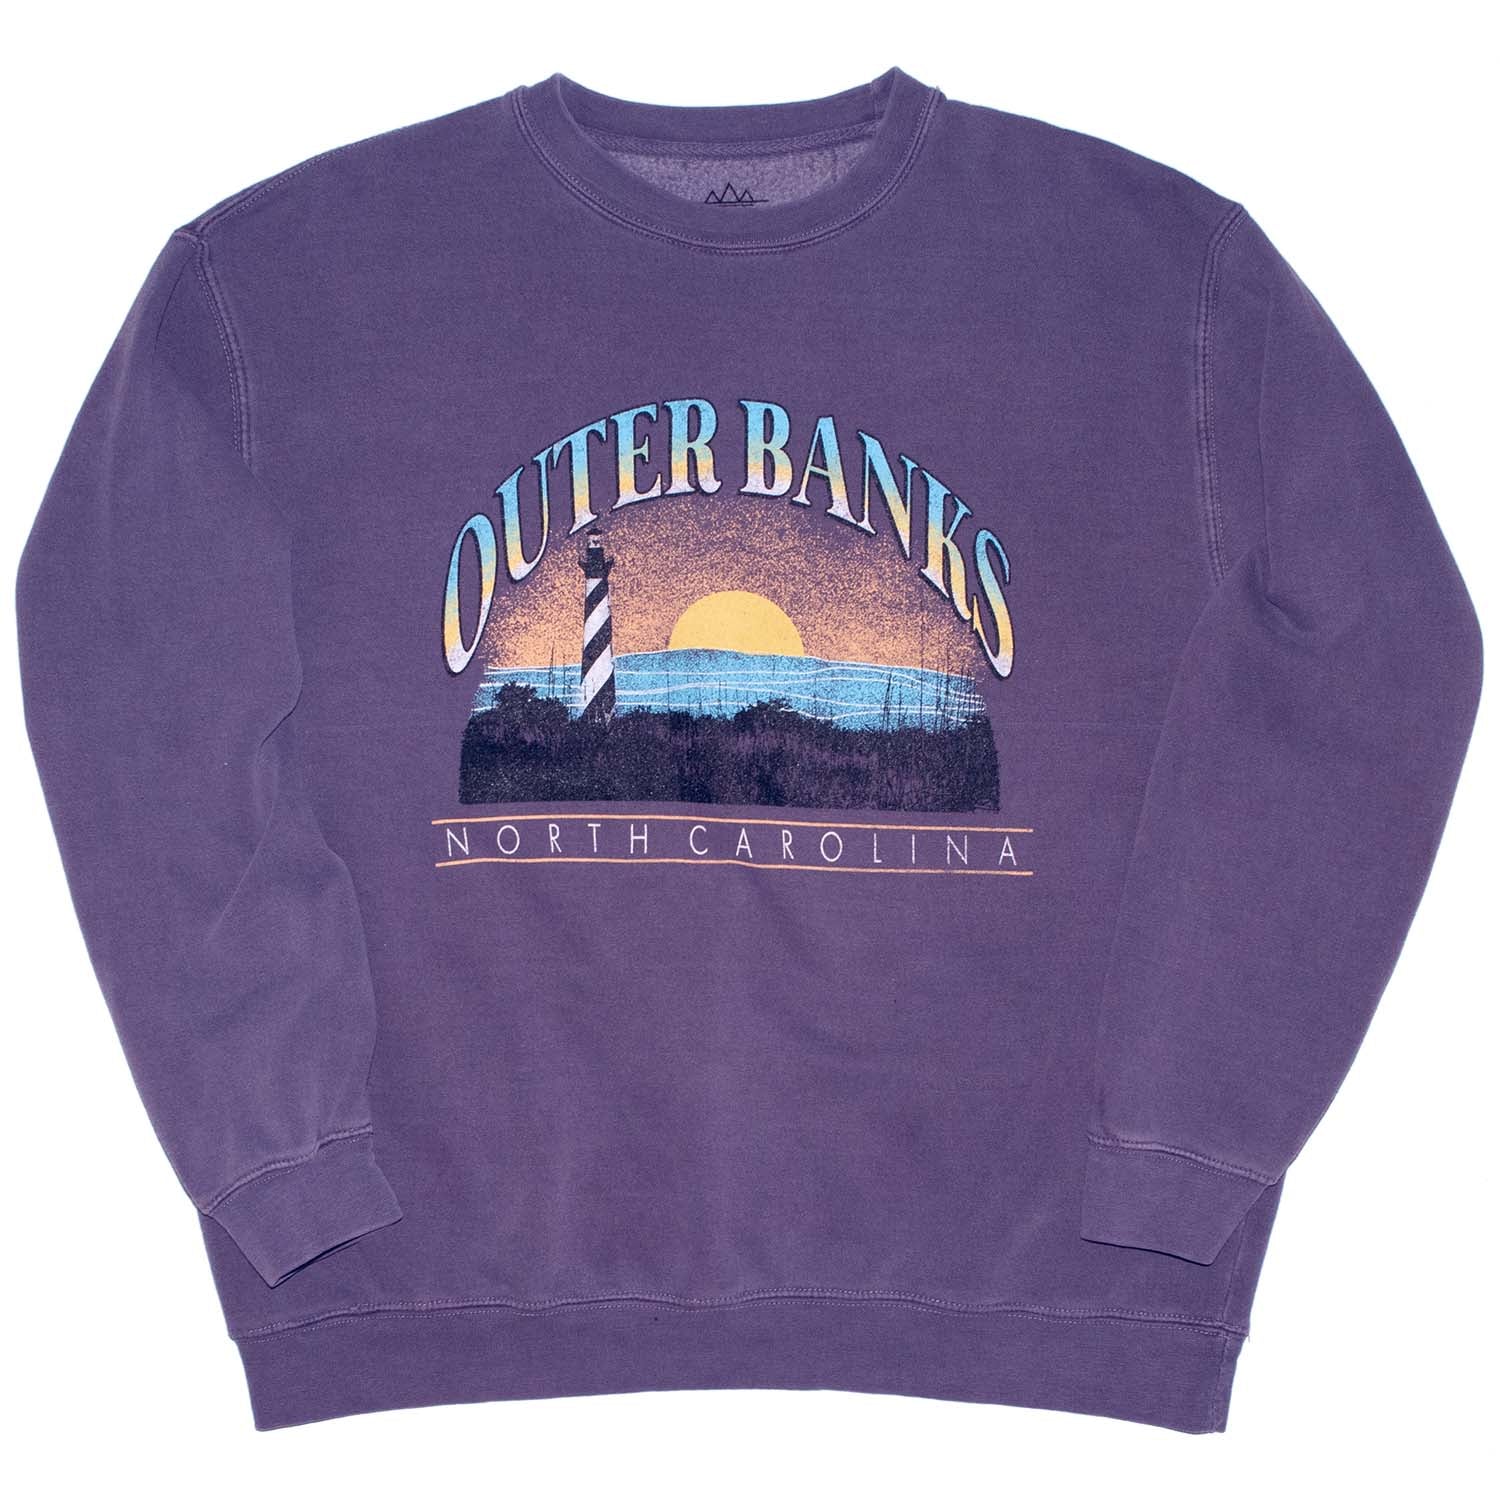 Outerbanks graphic on Pigment dye crew sweat shirt font image